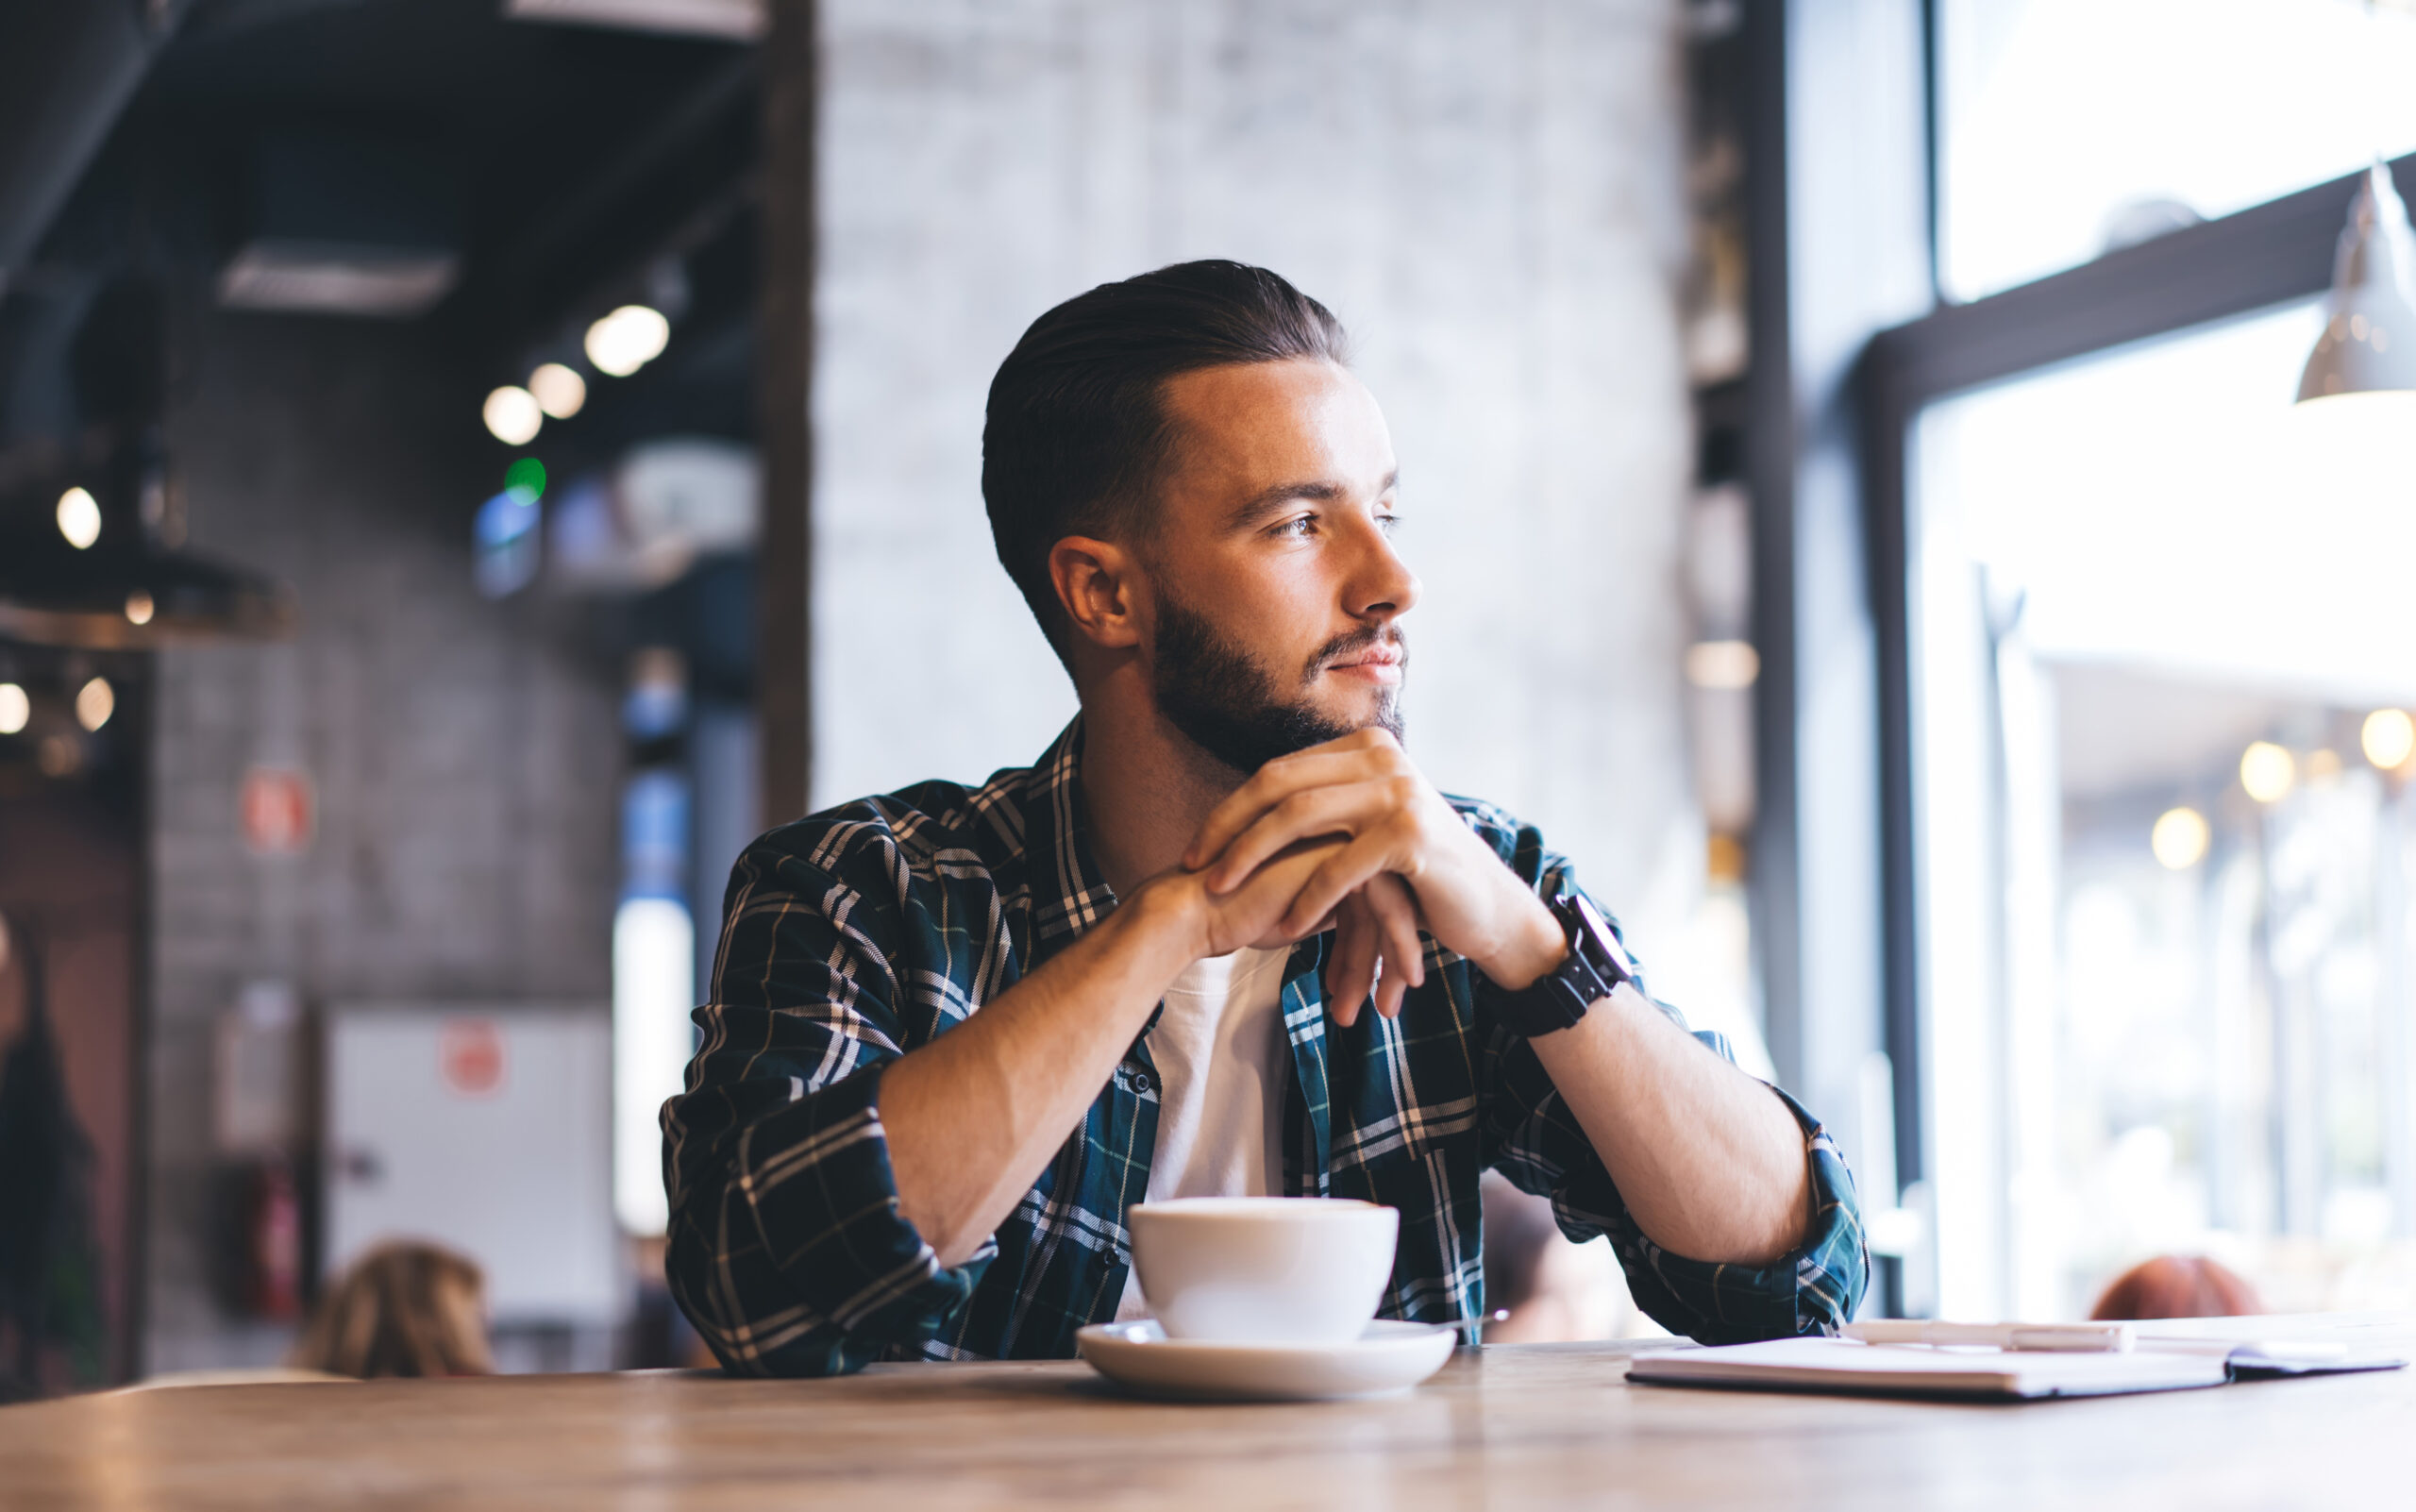 Man drinking coffee looking into distance